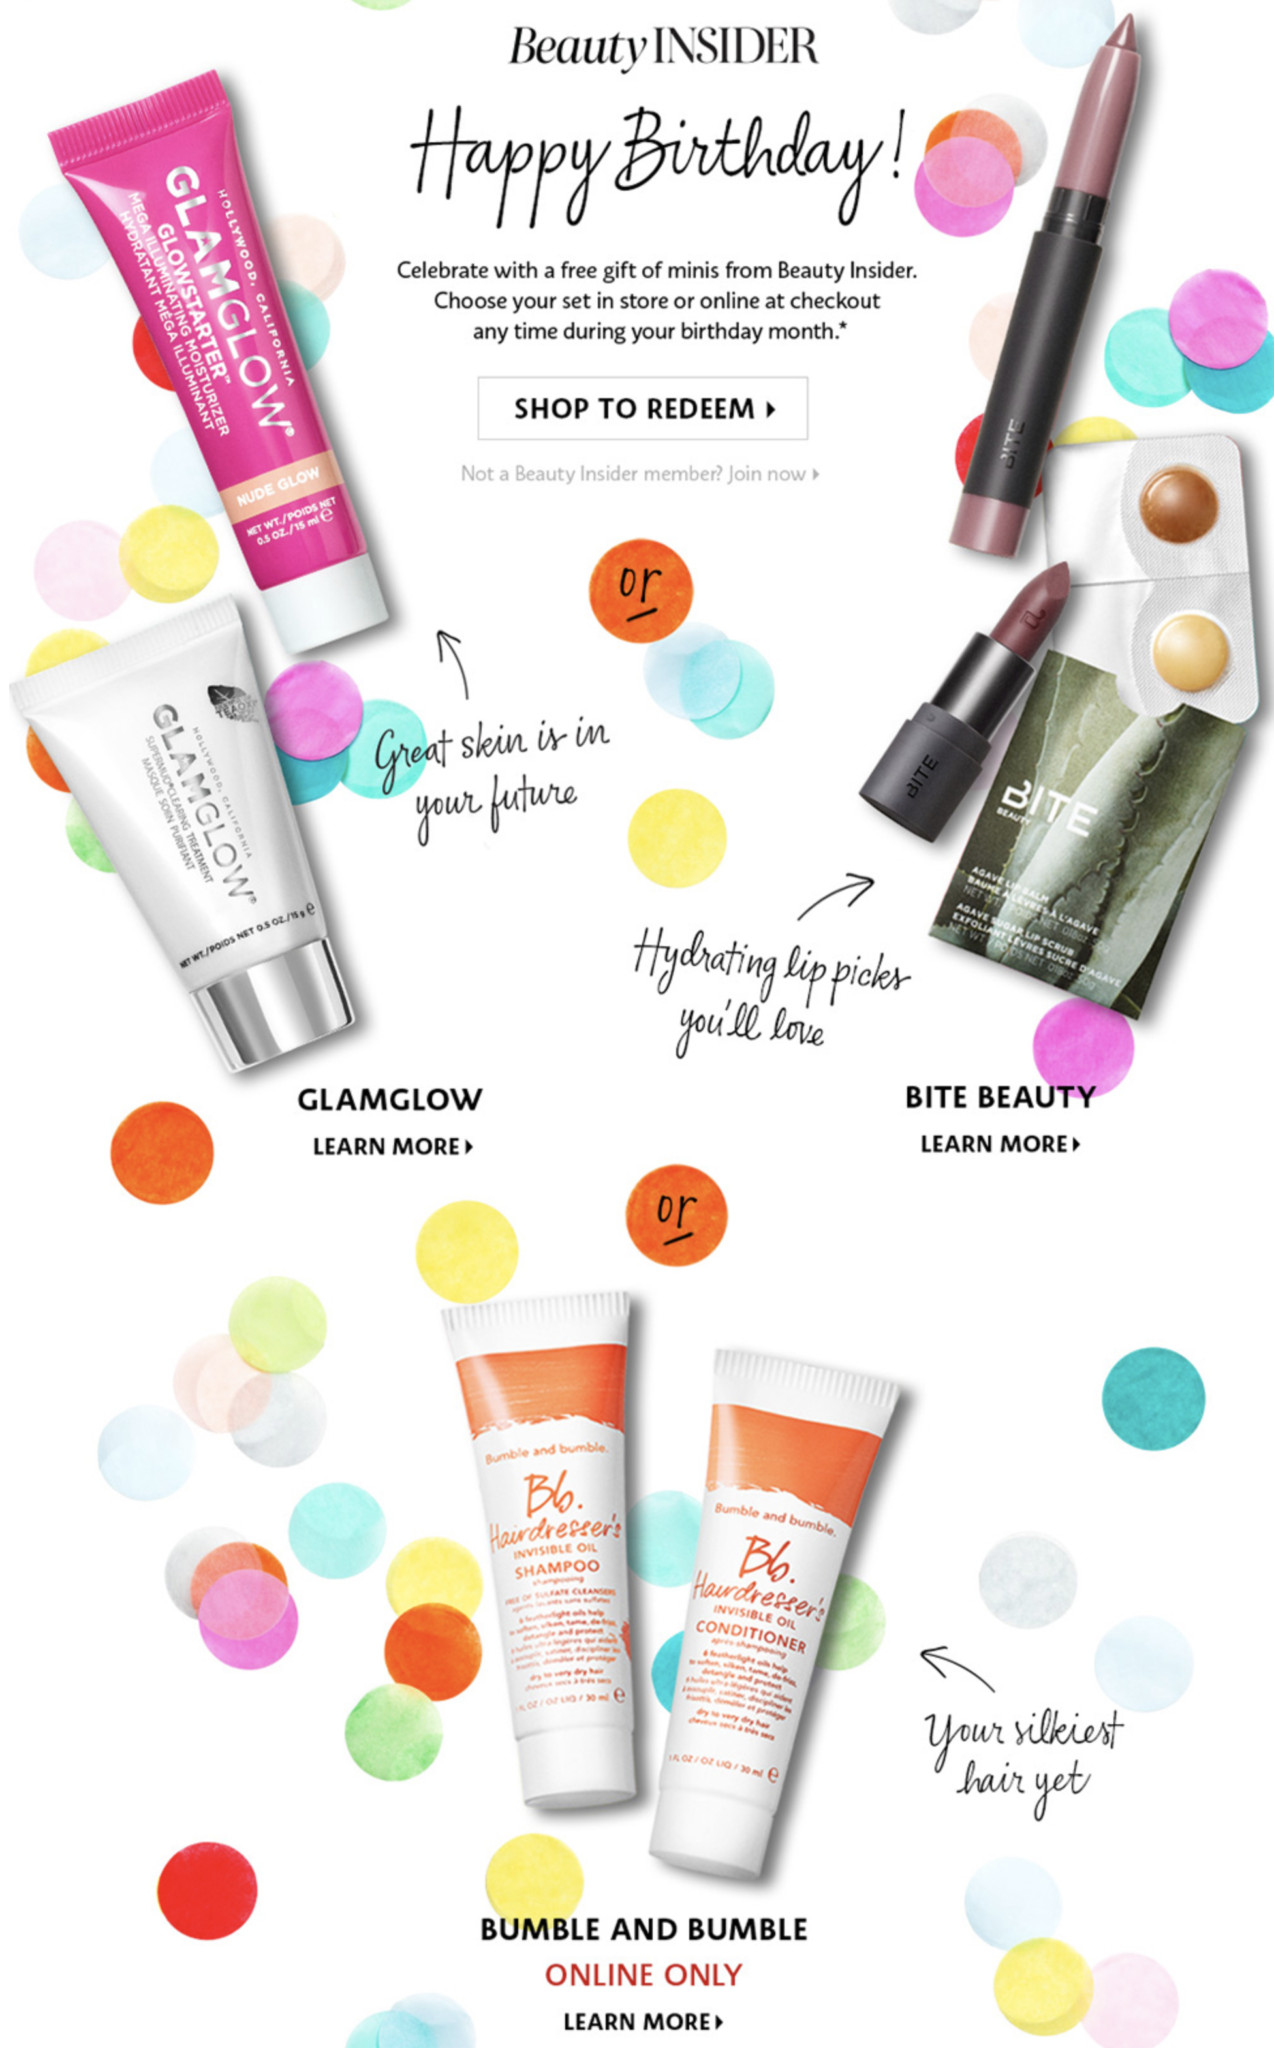 The Best Ideas for Sephora Free Birthday Gift Home, Family, Style and